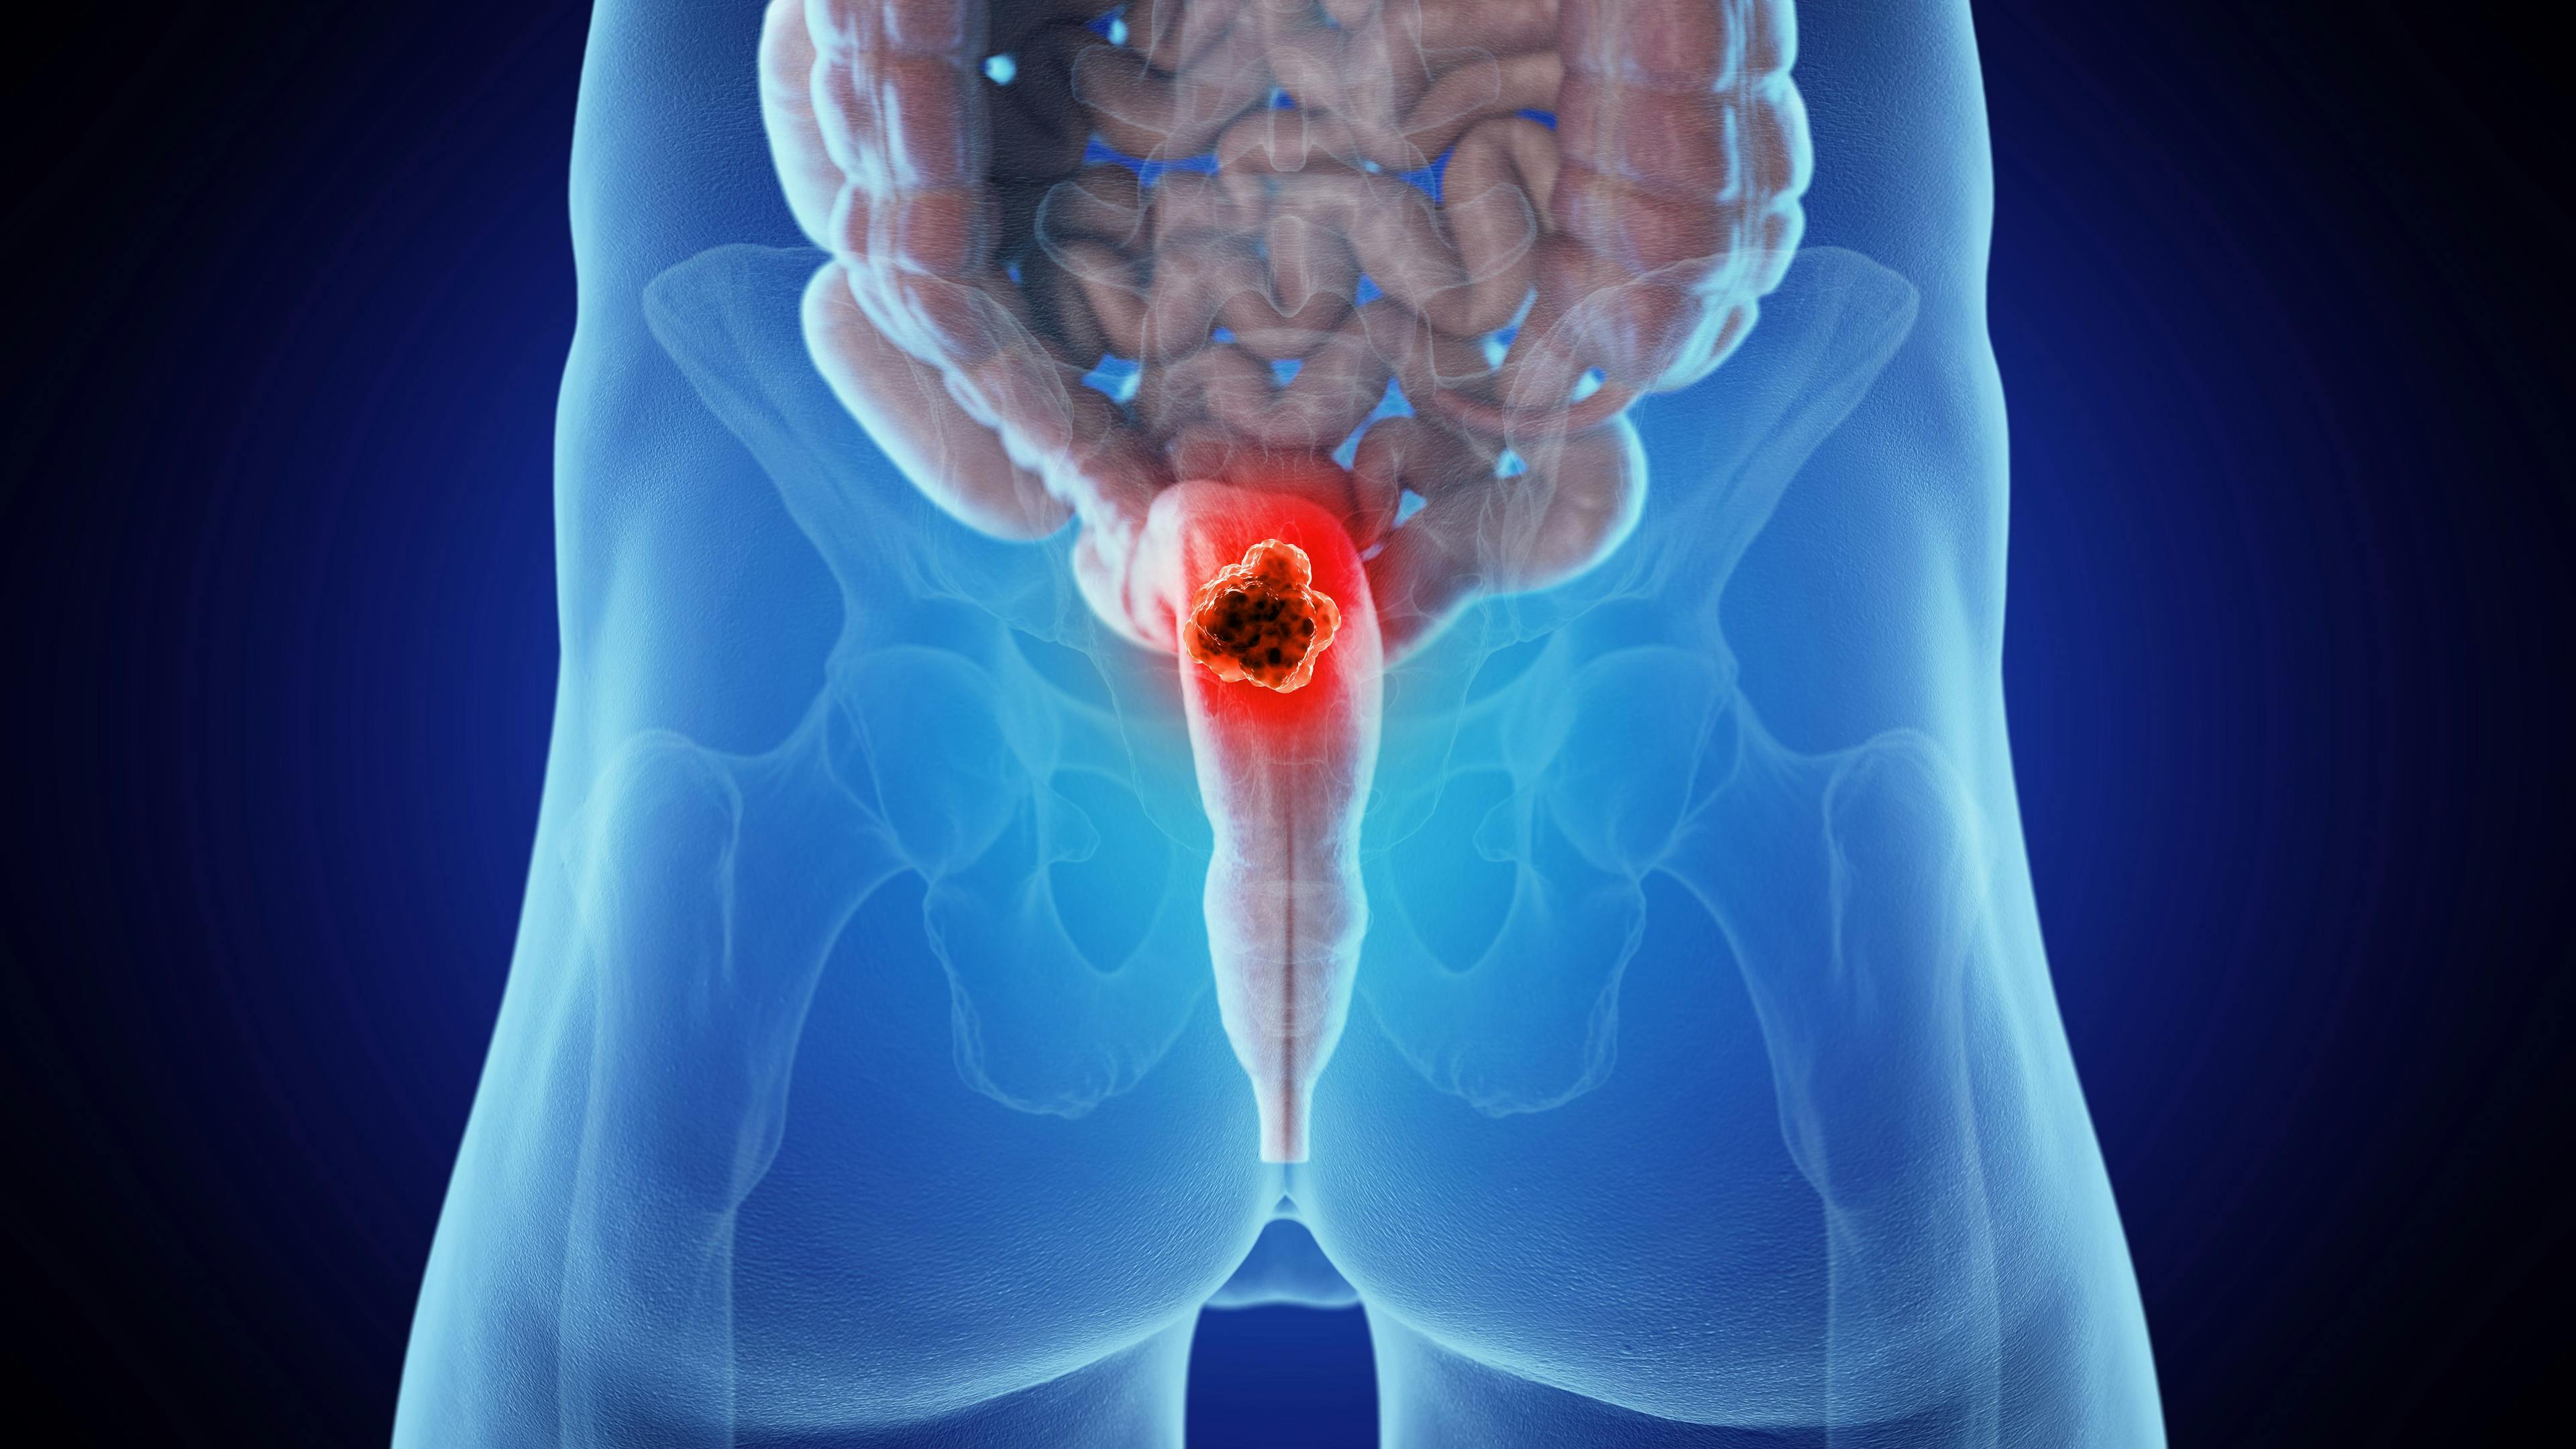 Rectal cancer can be aggressive in younger patients | Image credit: Sebastian Kaulitzki - stock.adobe.com